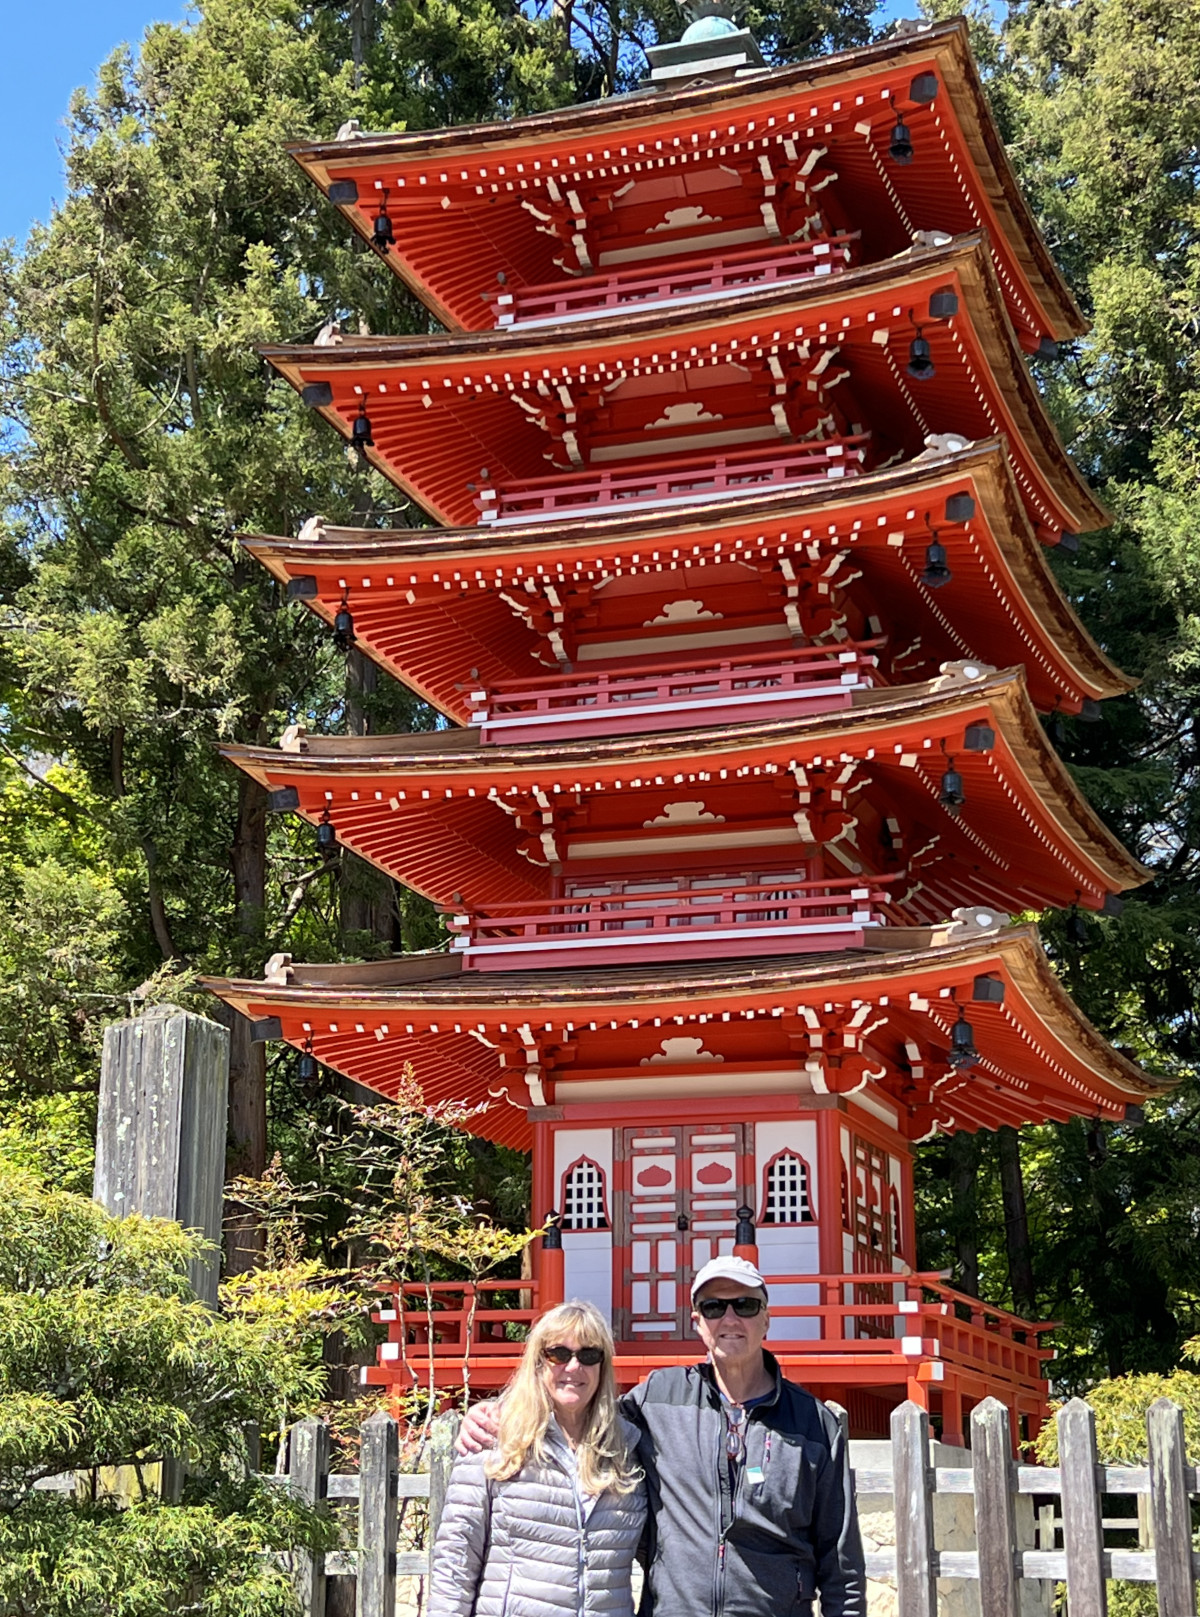 Mike and Kathy in front of Pagoda